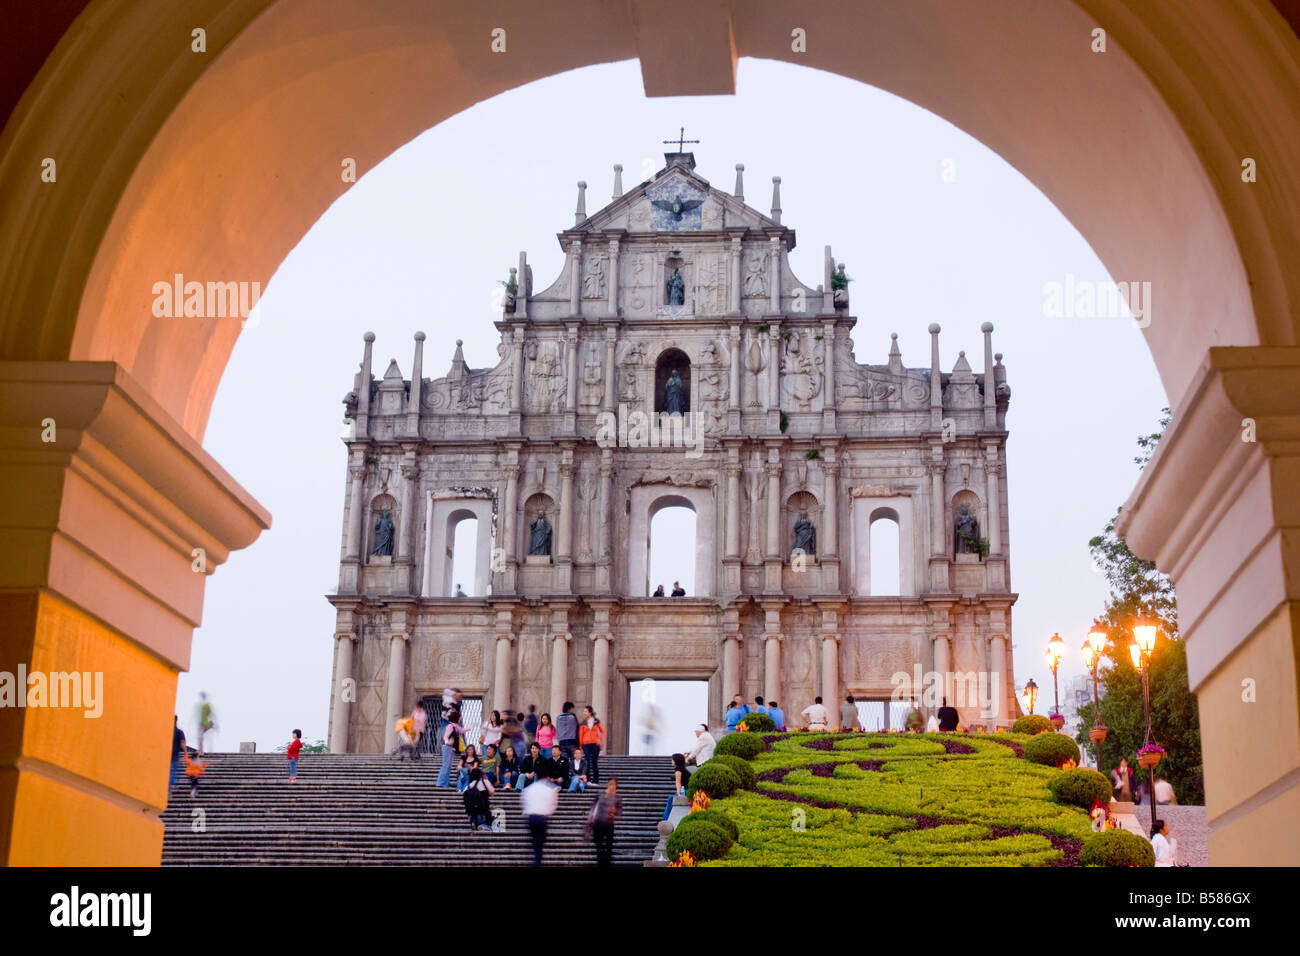 St. Paul's cathedral facade, Macau, China, Asia Stock Photo